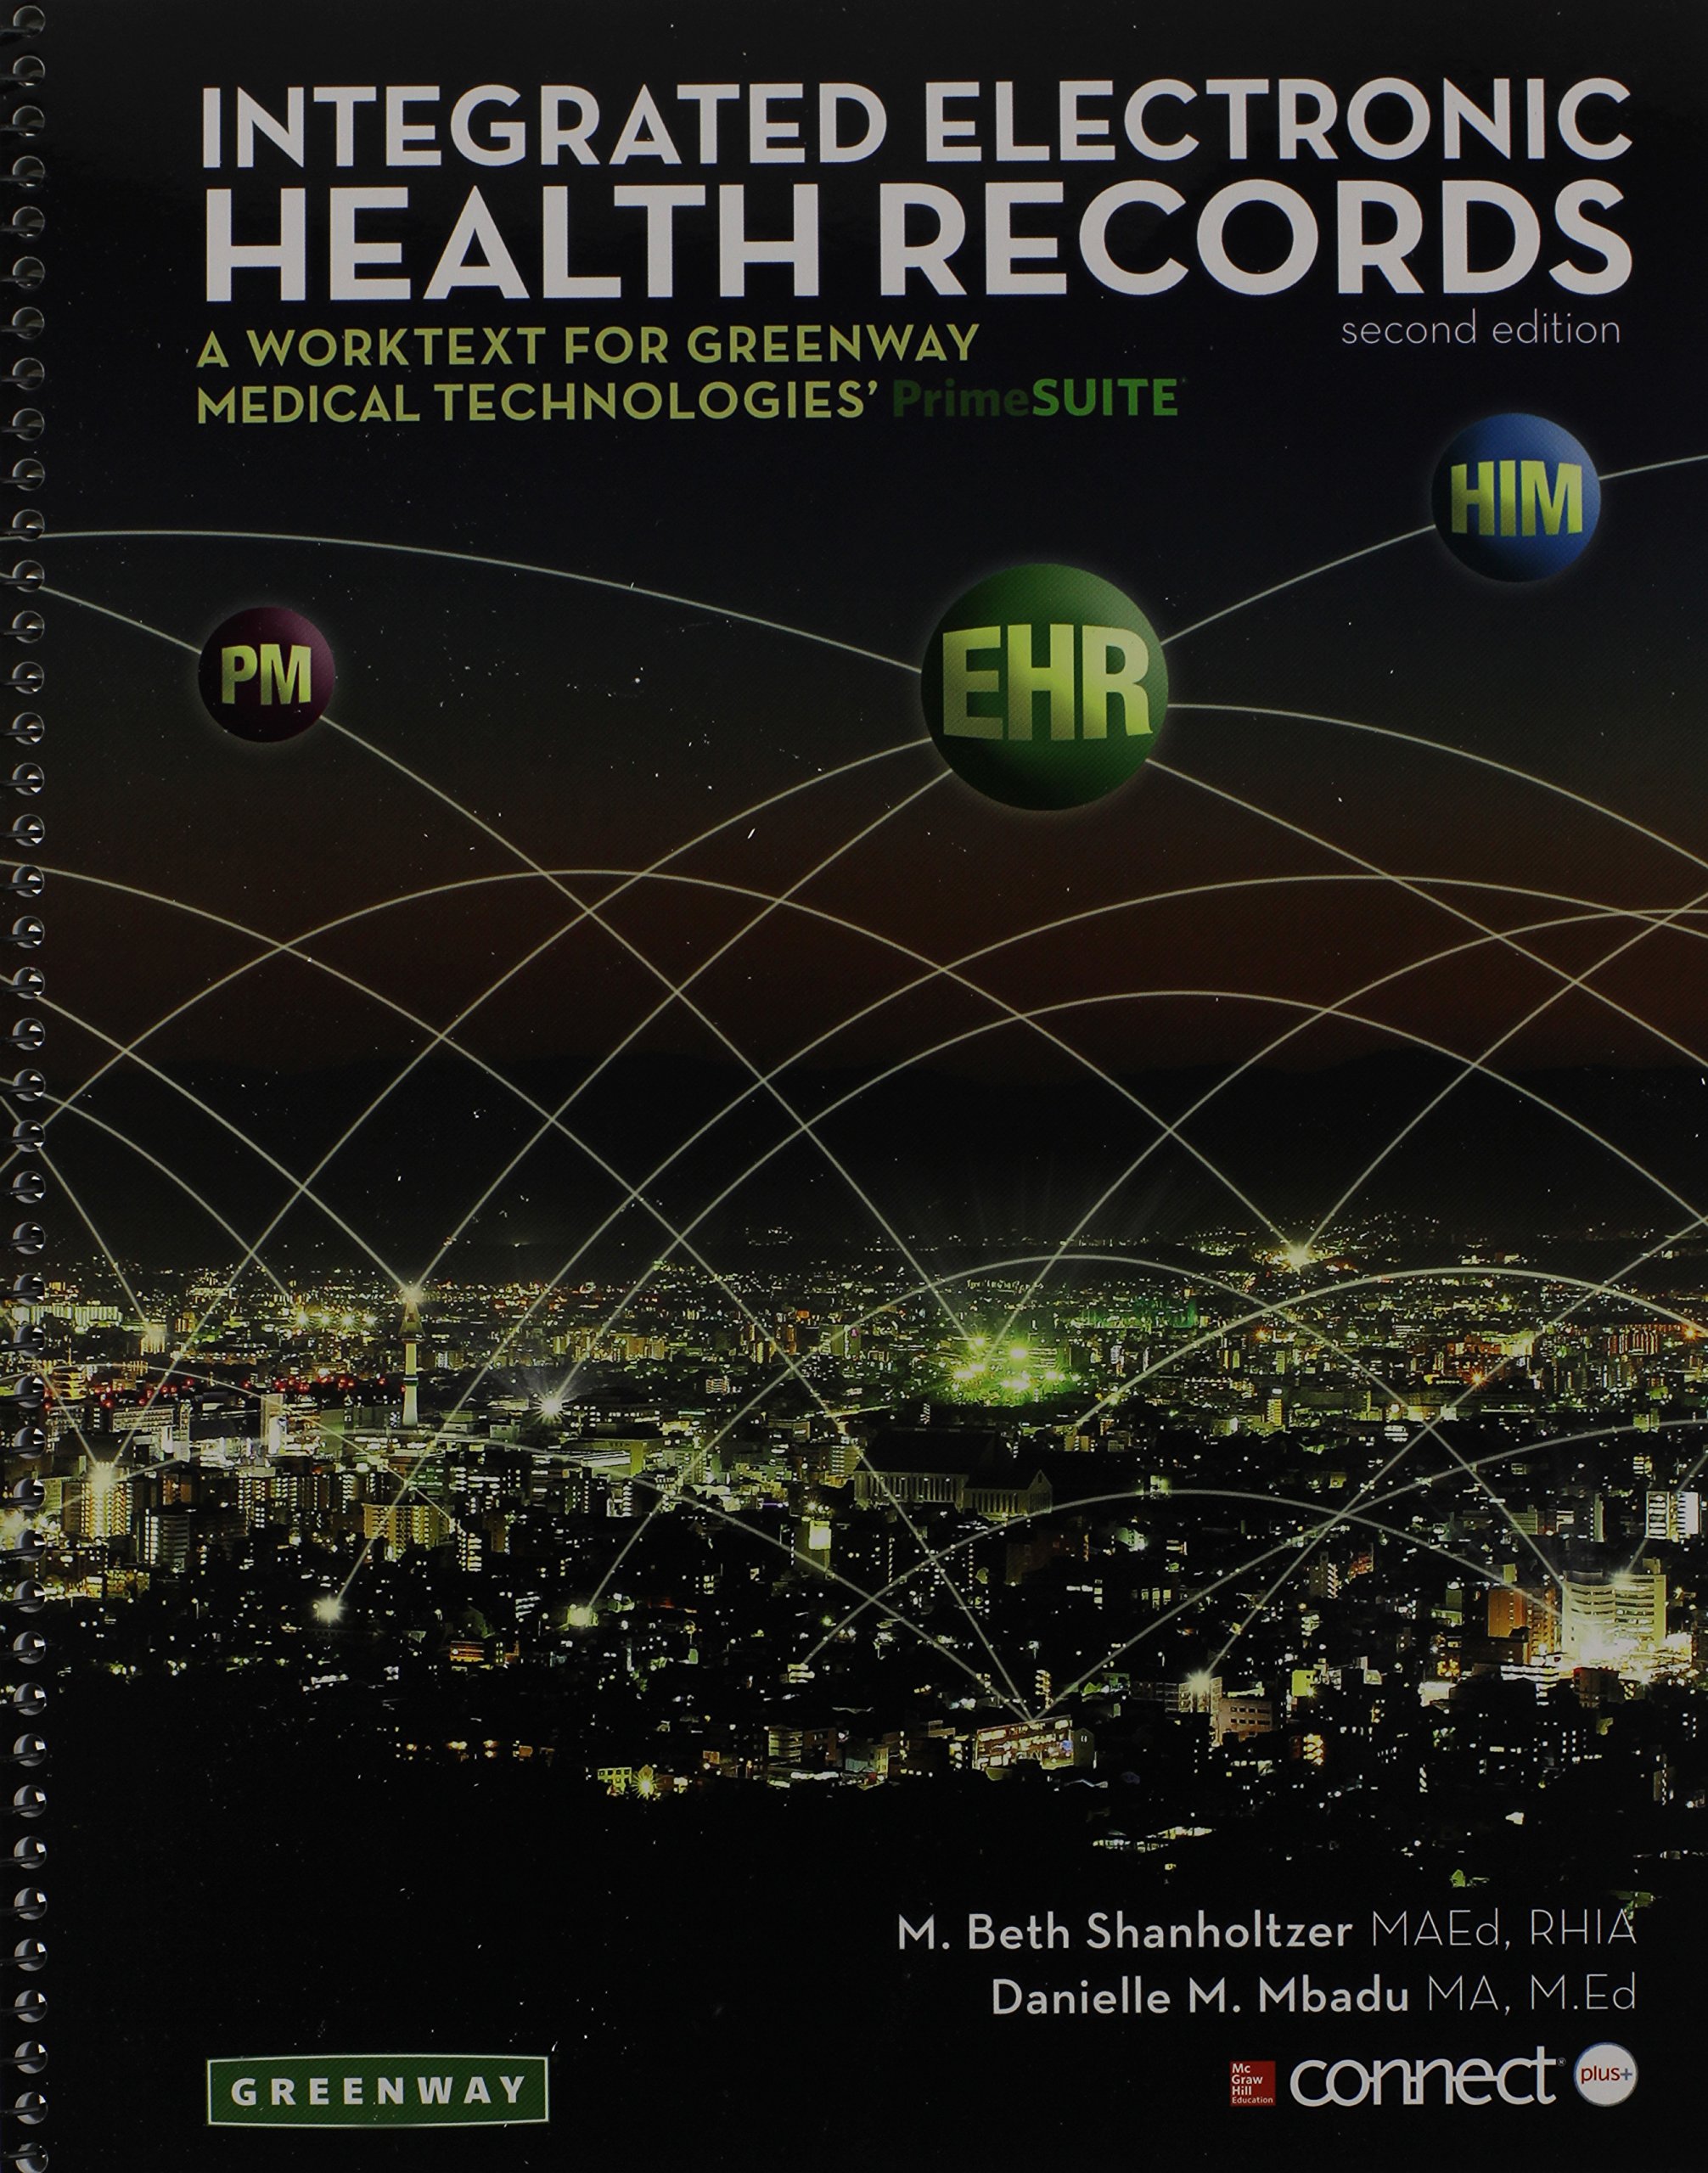 Integrated Electronic Health Records with Connect Access Card